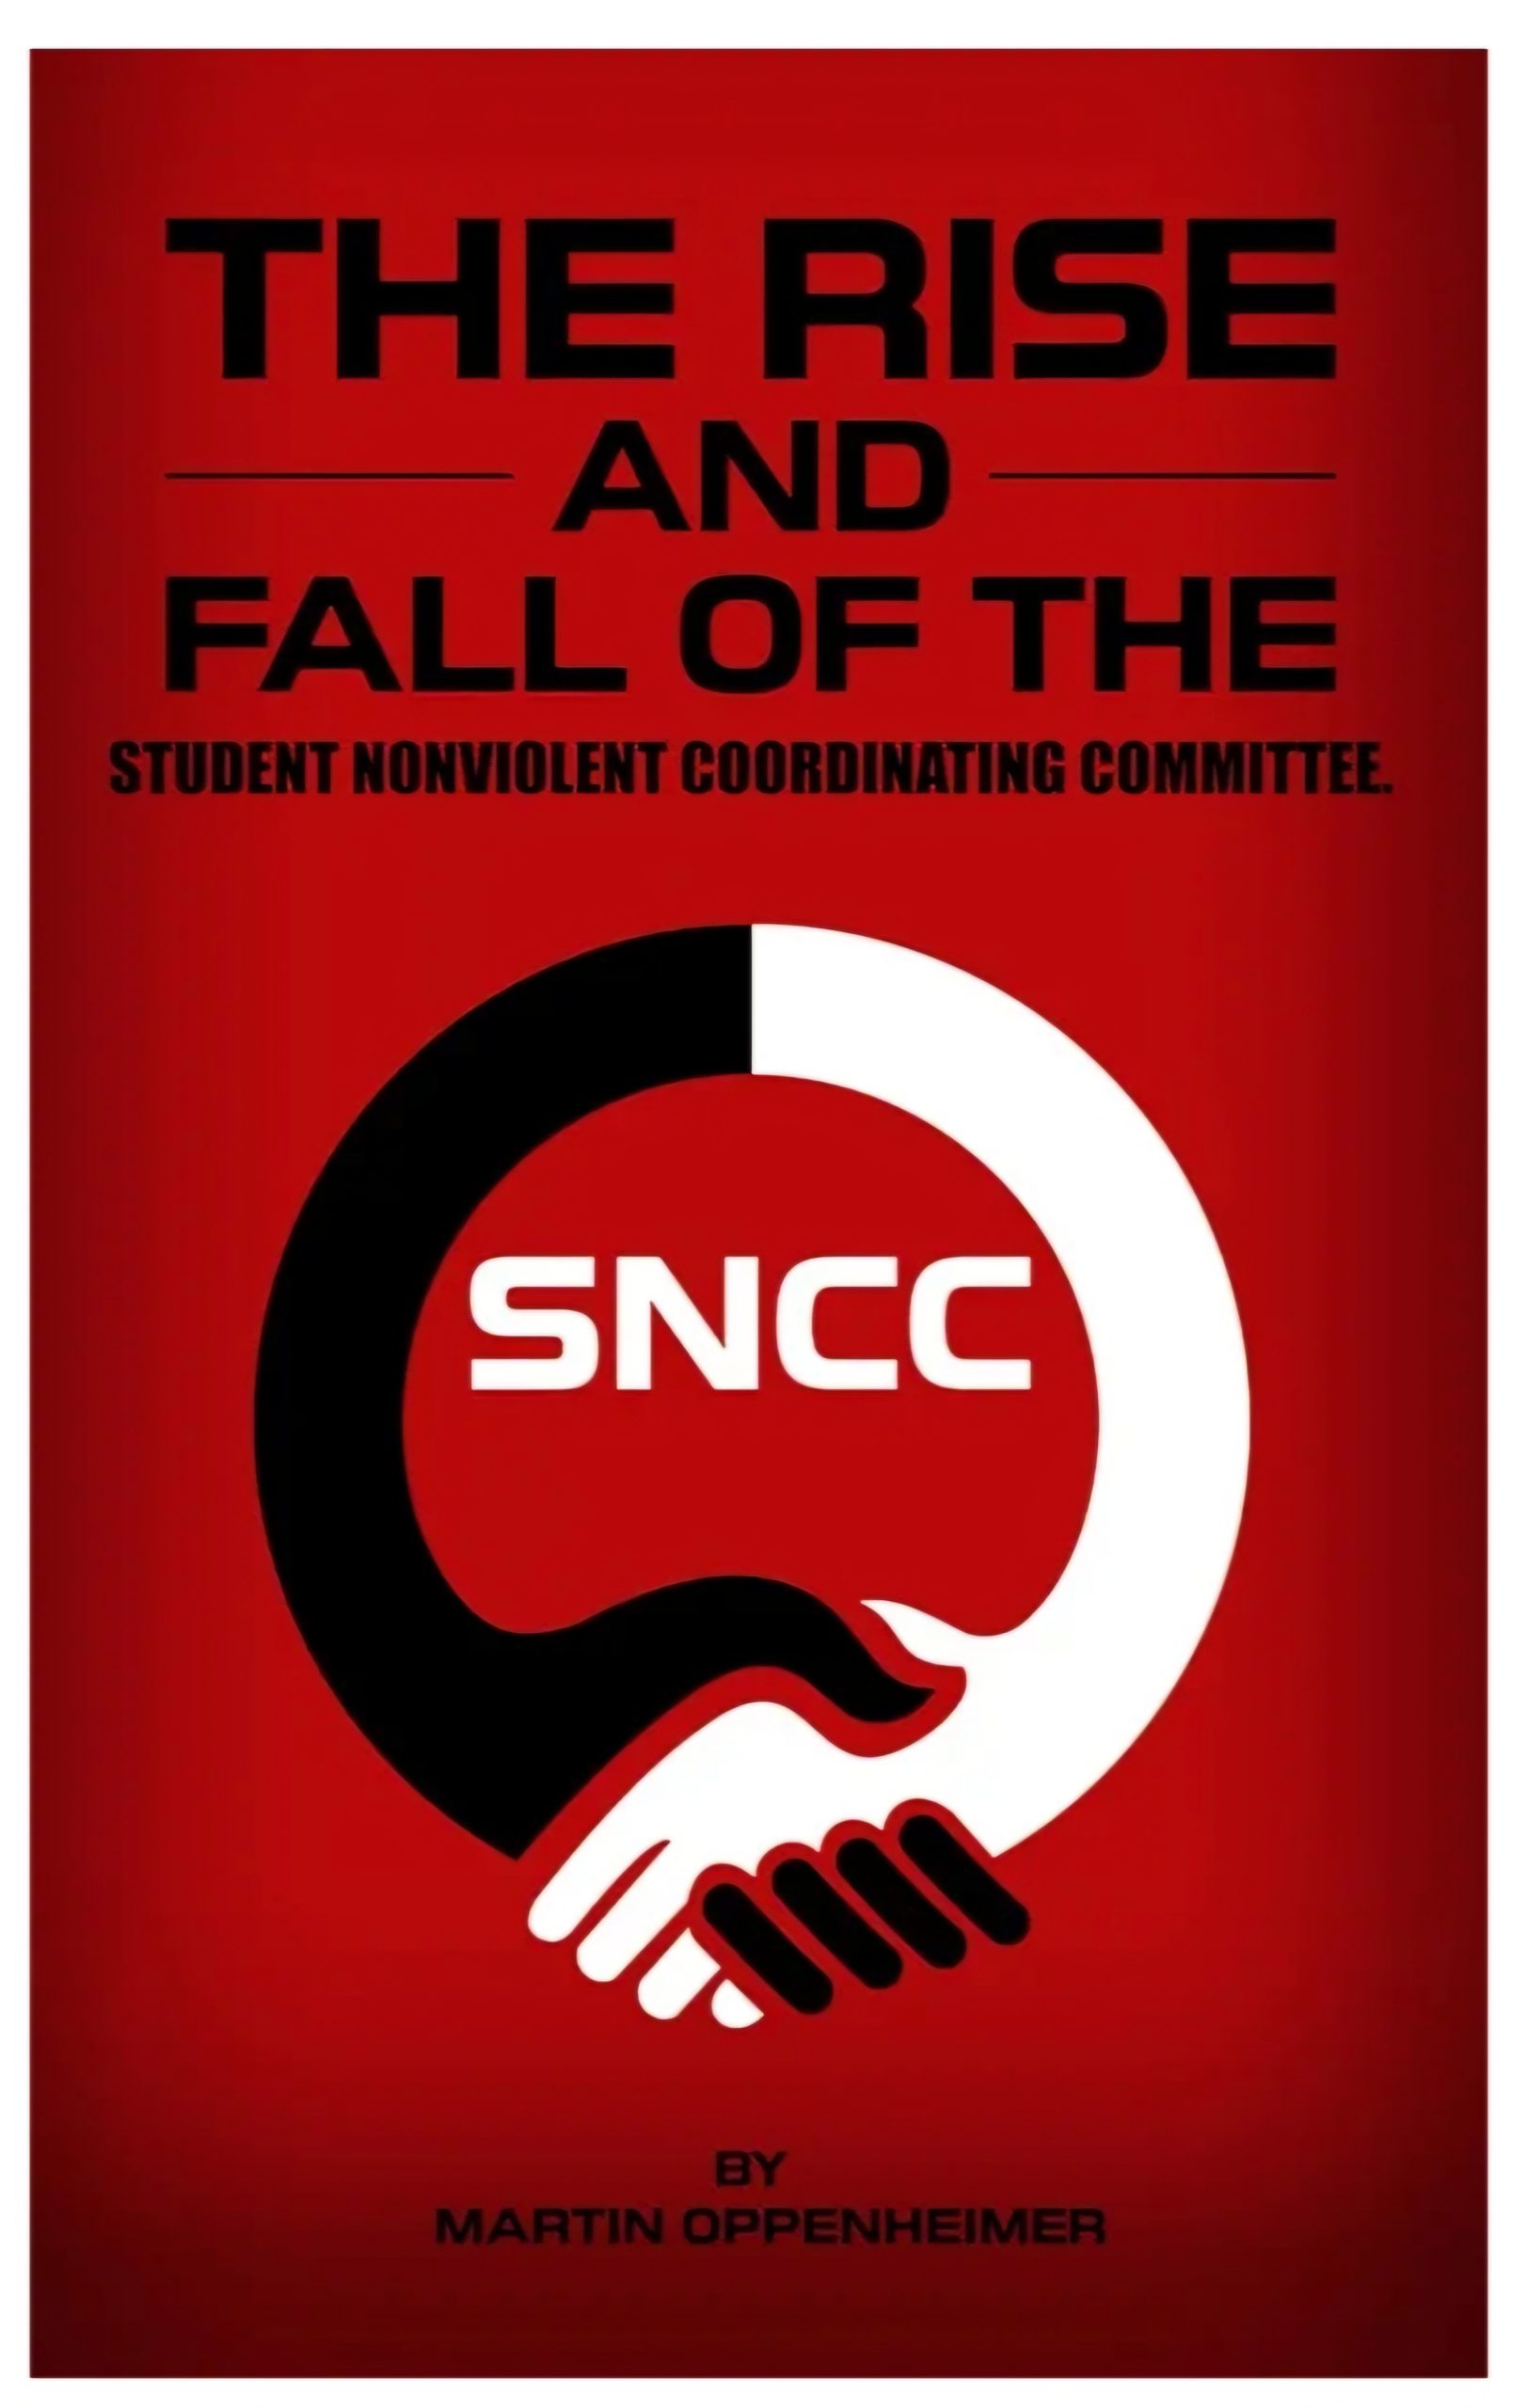 Announcing Oppenheimer’s: The Rise And Fall Of The Student Nonviolence Coordinating Committee